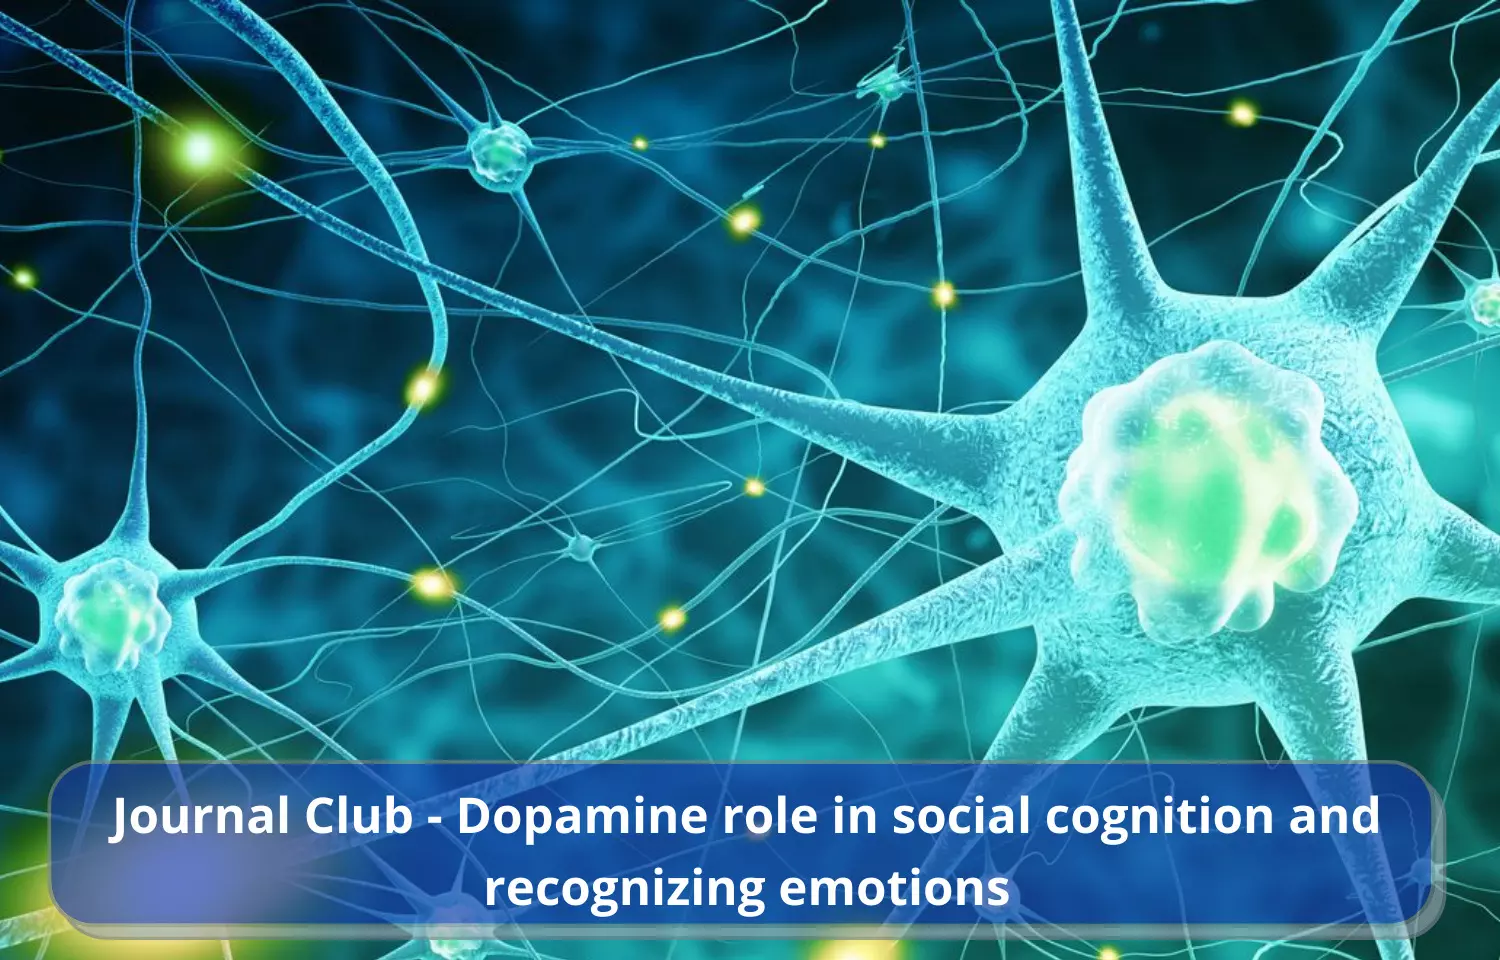 Journal Club - Dopamine role in social cognition and recognizing emotions